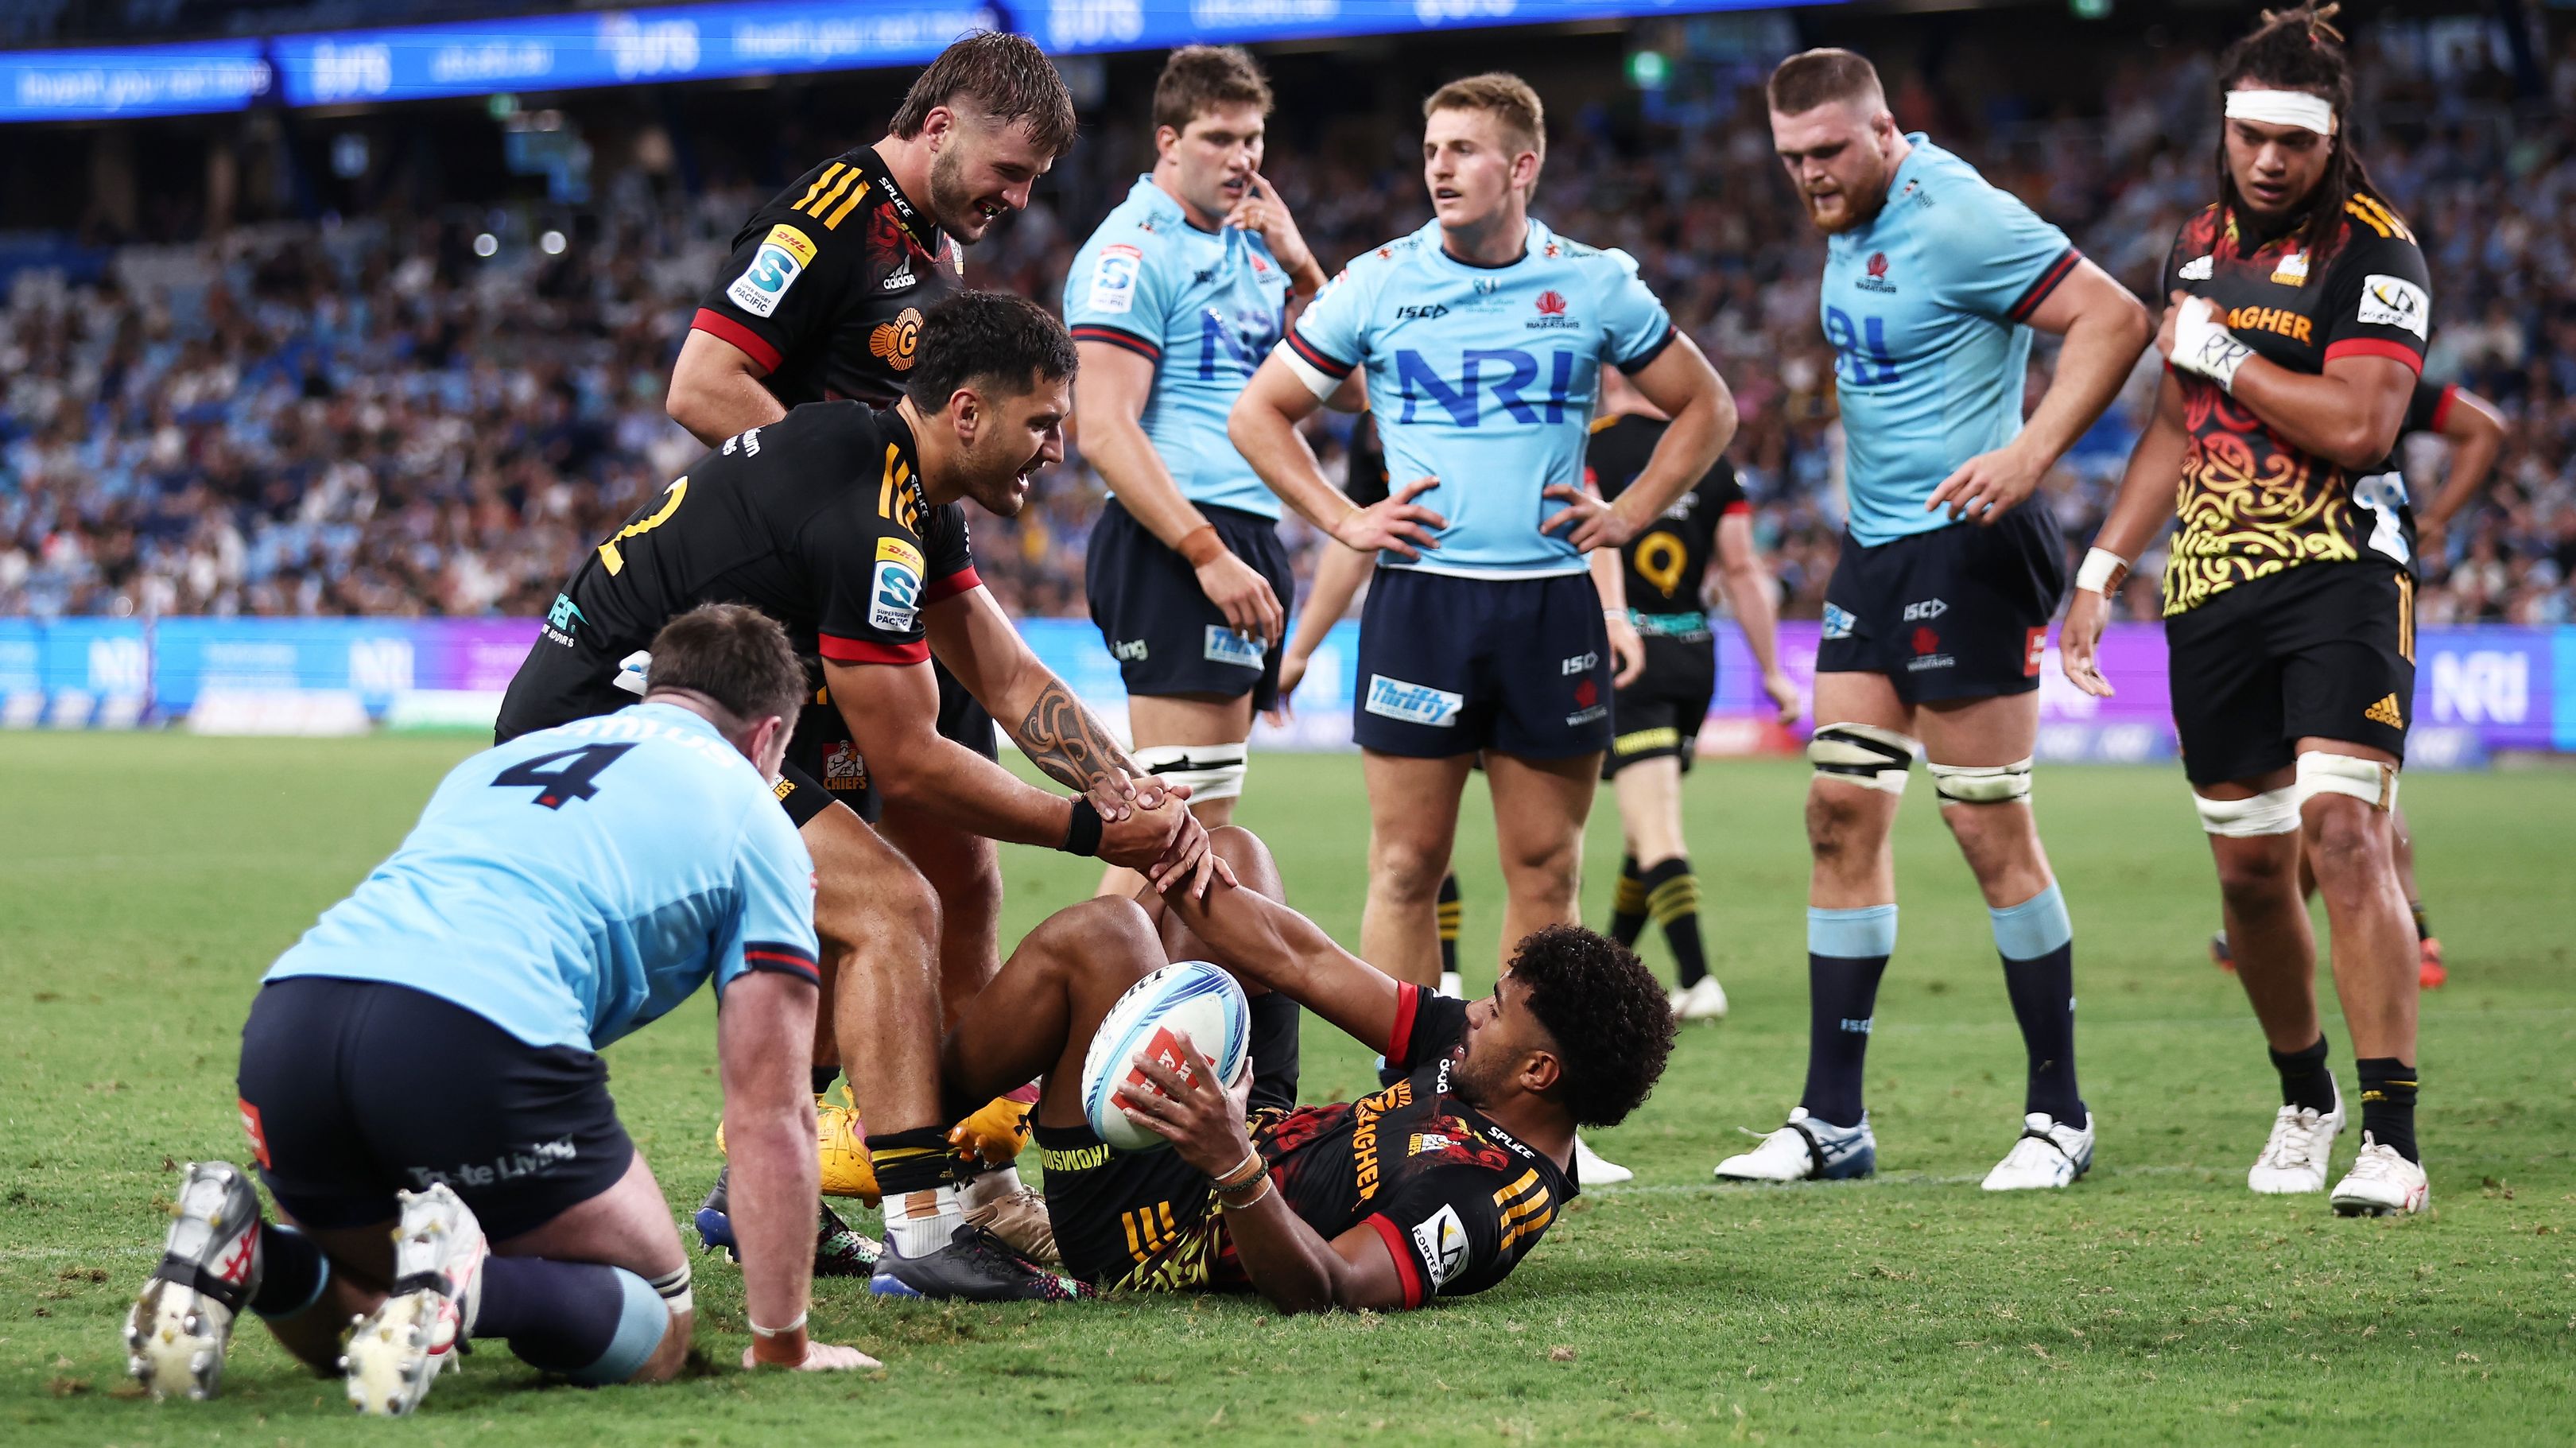 The Chiefs celebrate while the Waratahs lick their wounds after another try for Emoni Narawa.